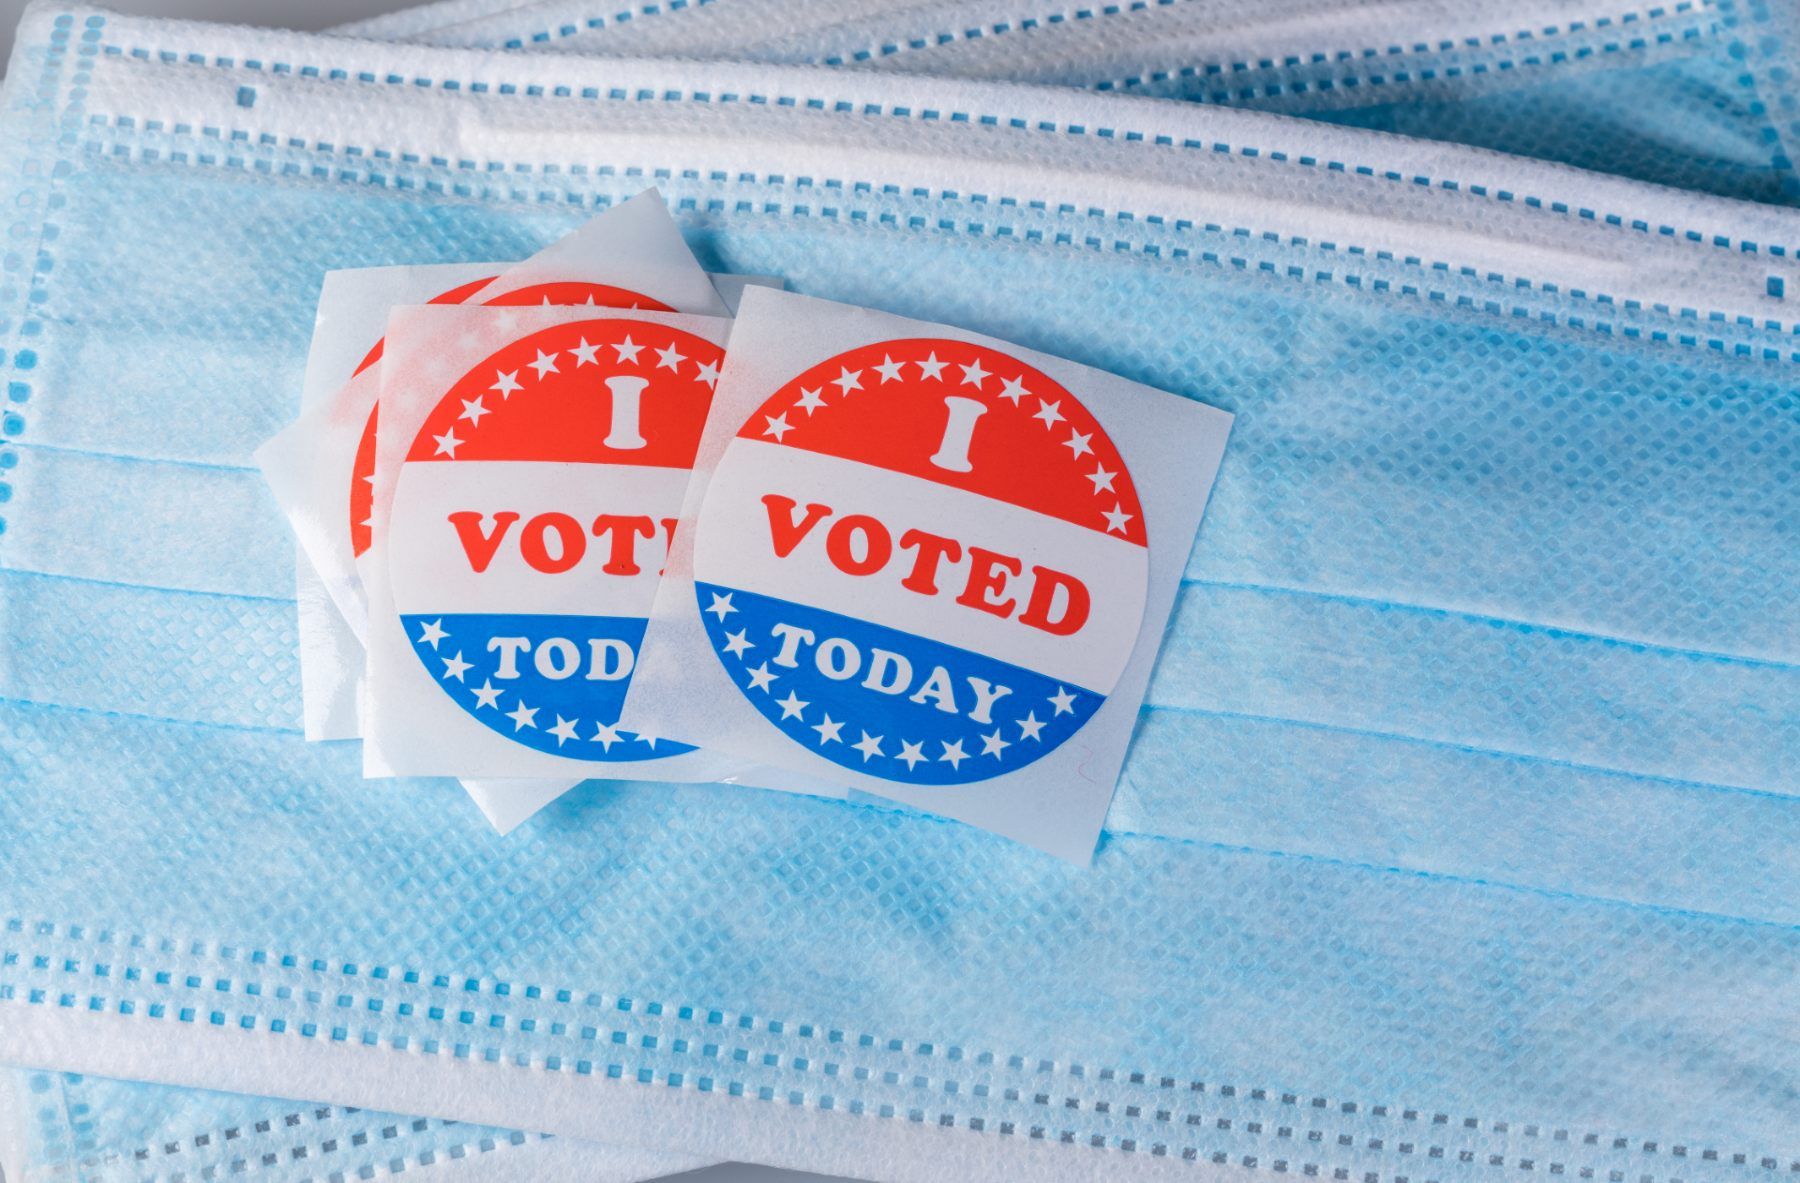 Circular "I voted today" stickers lie on top of light blue surgical masks - 